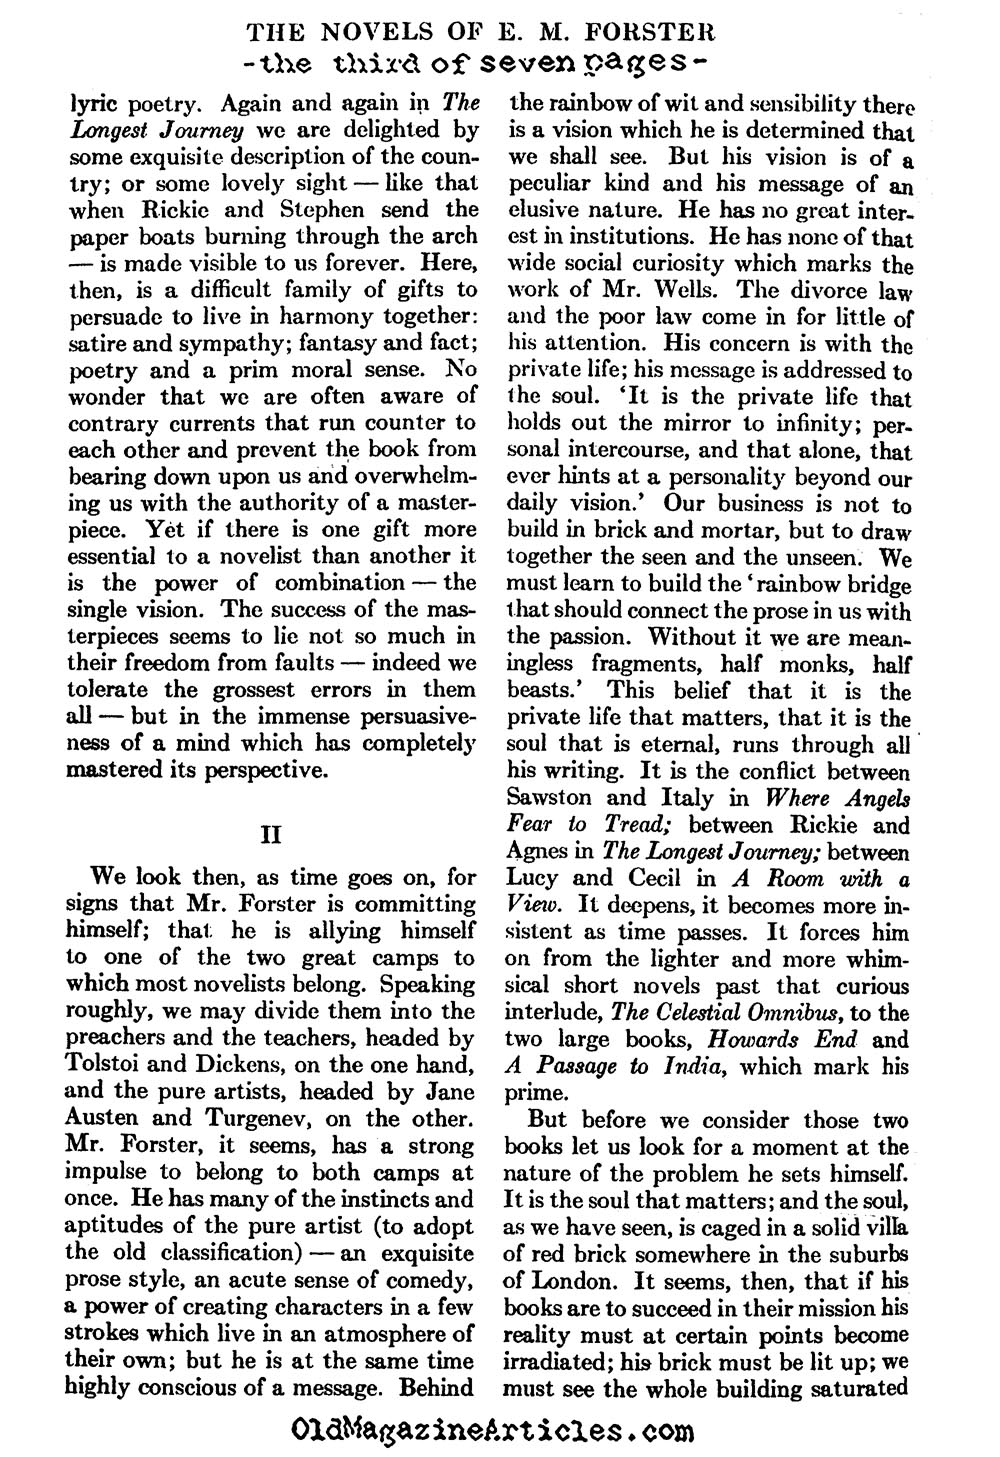 Virginia Woolf Reviews E.M. Forster (Atlantic Monthly, 1927)